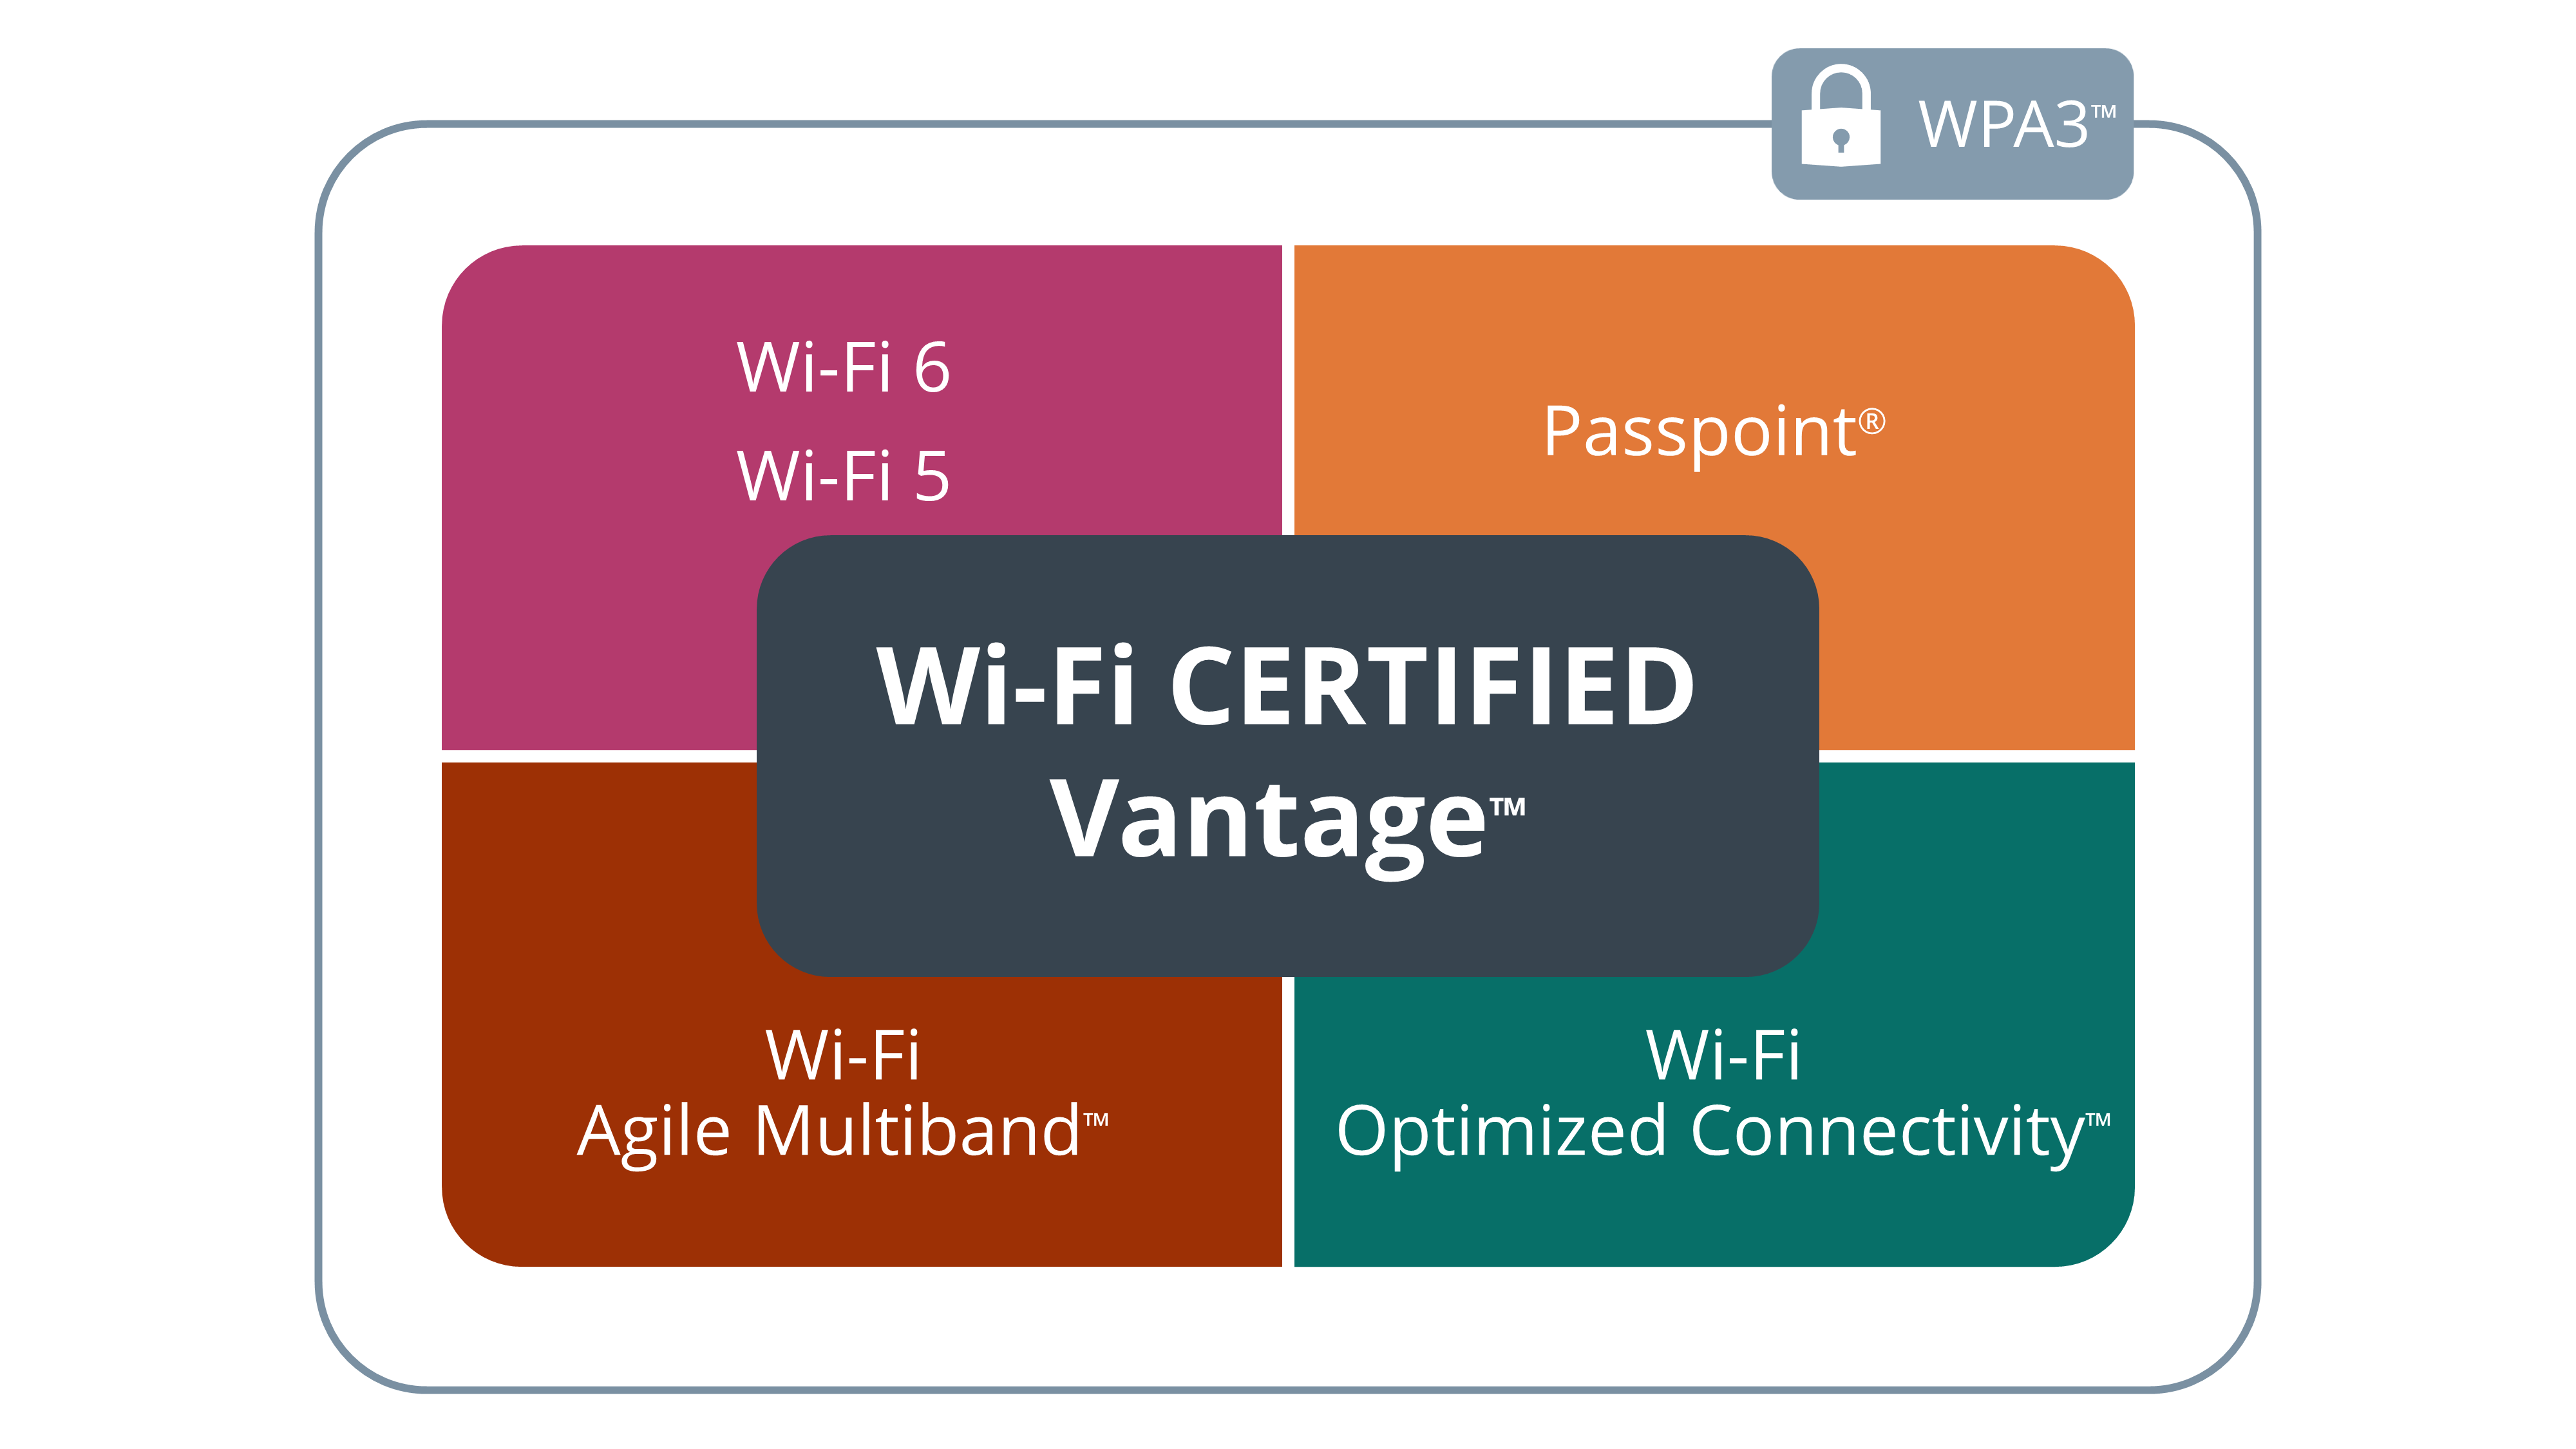 NEW RELEASE OF WI-FI CERTIFIED VANTAGE™ CONTINUES TO IMPROVE THE WI-FI USER EXPERIENCE 